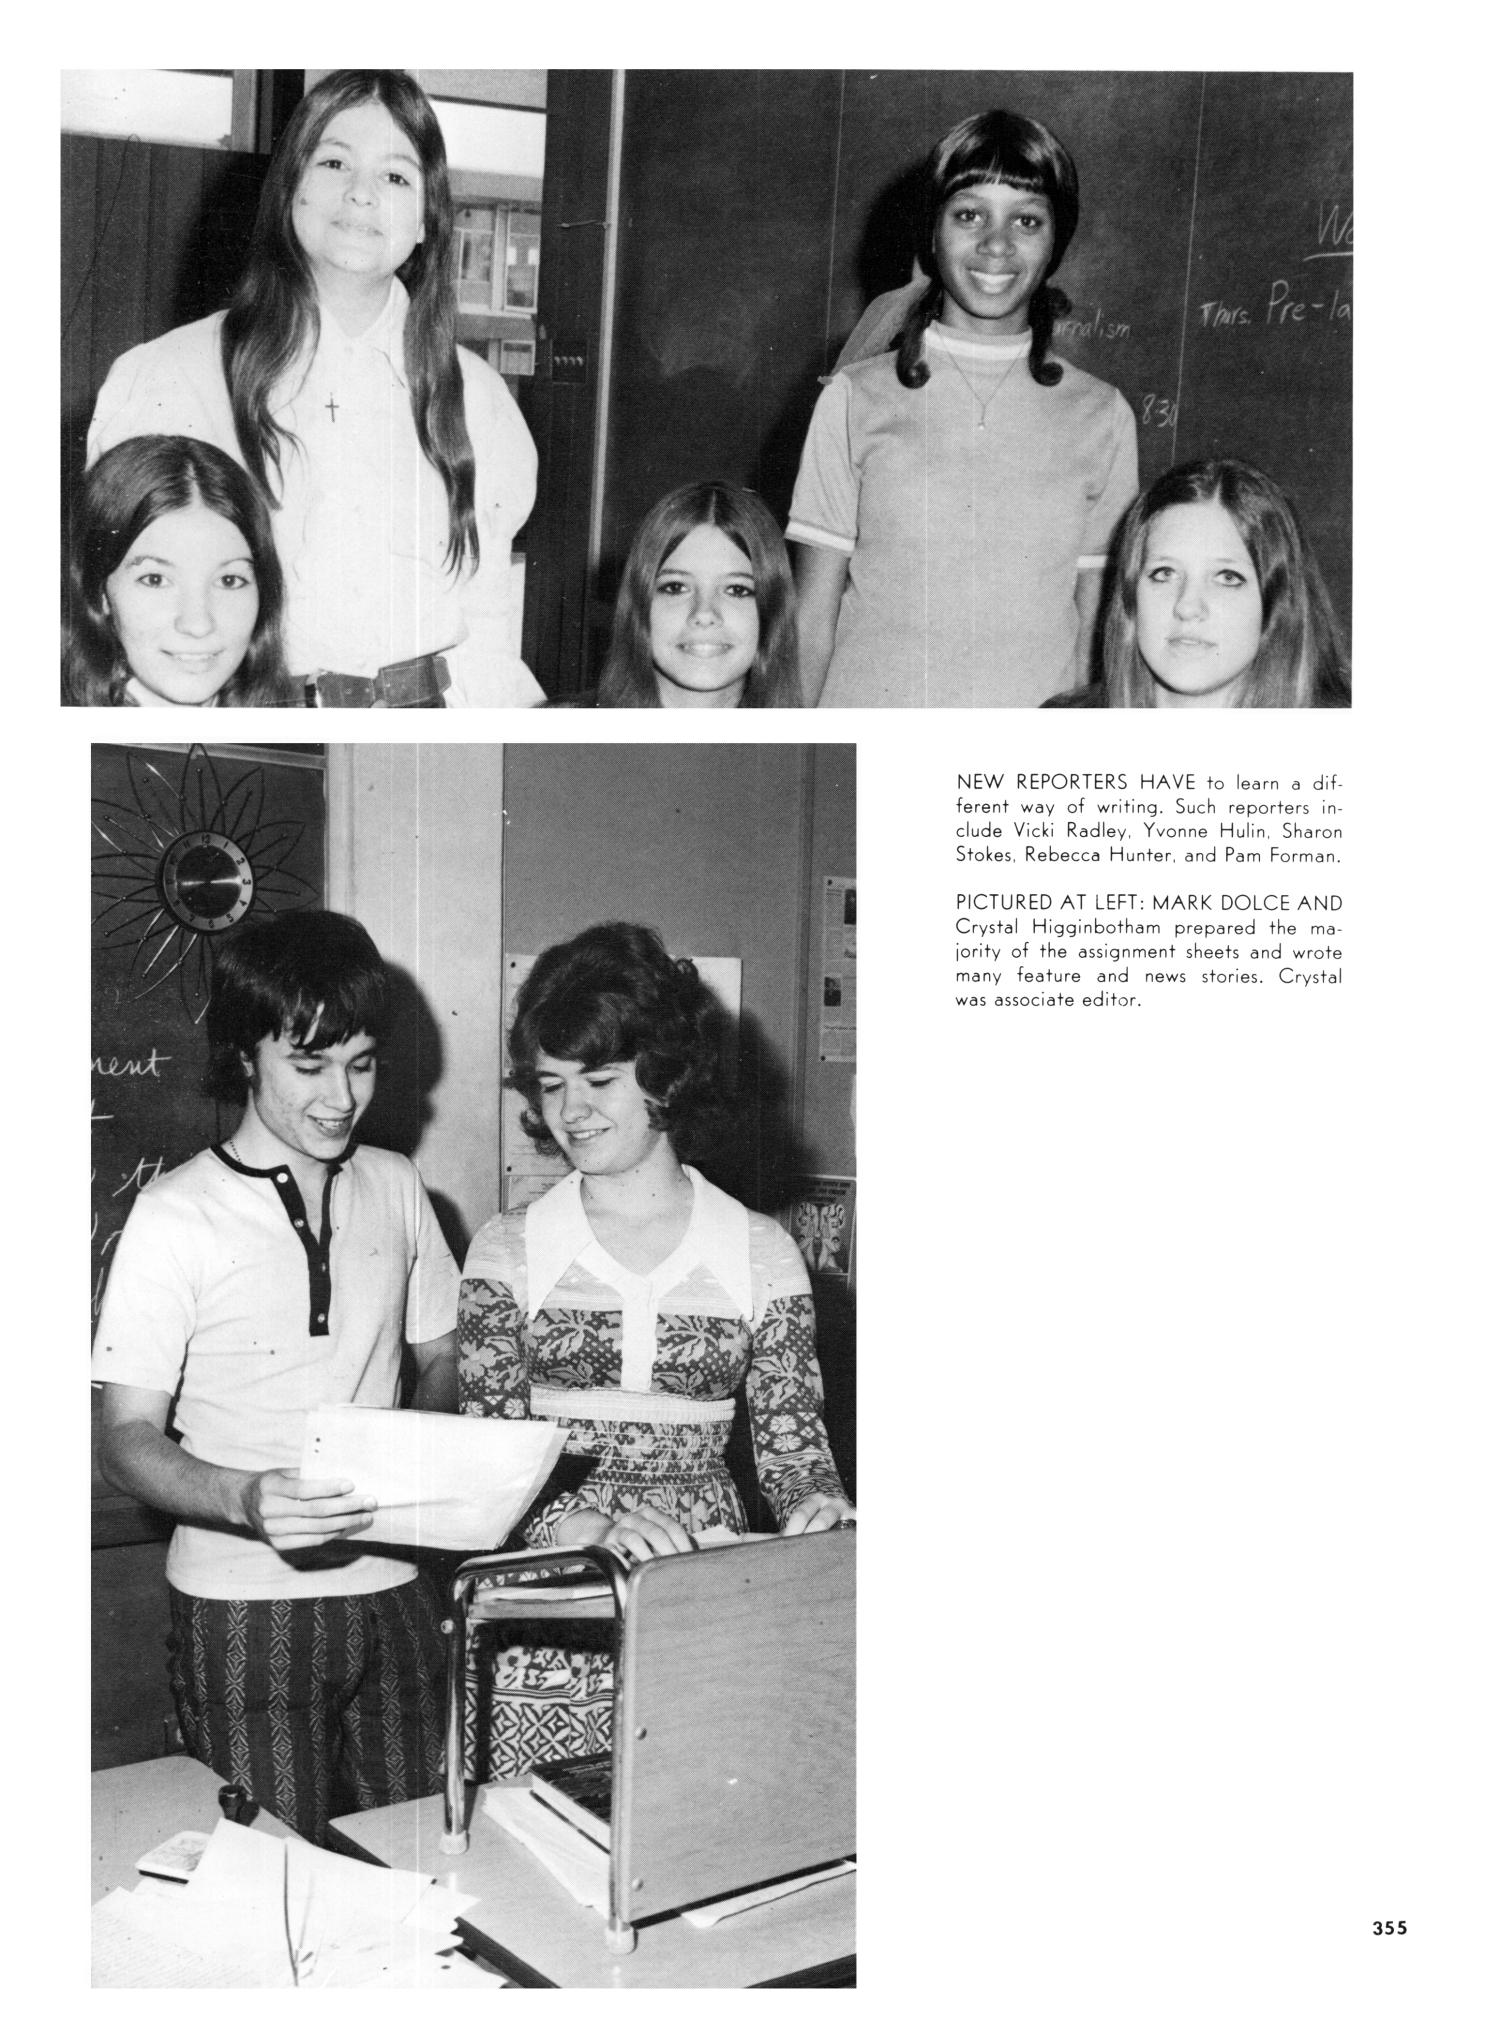 The Yellow Jacket, Yearbook of Thomas Jefferson High School, 1972
                                                
                                                    355
                                                